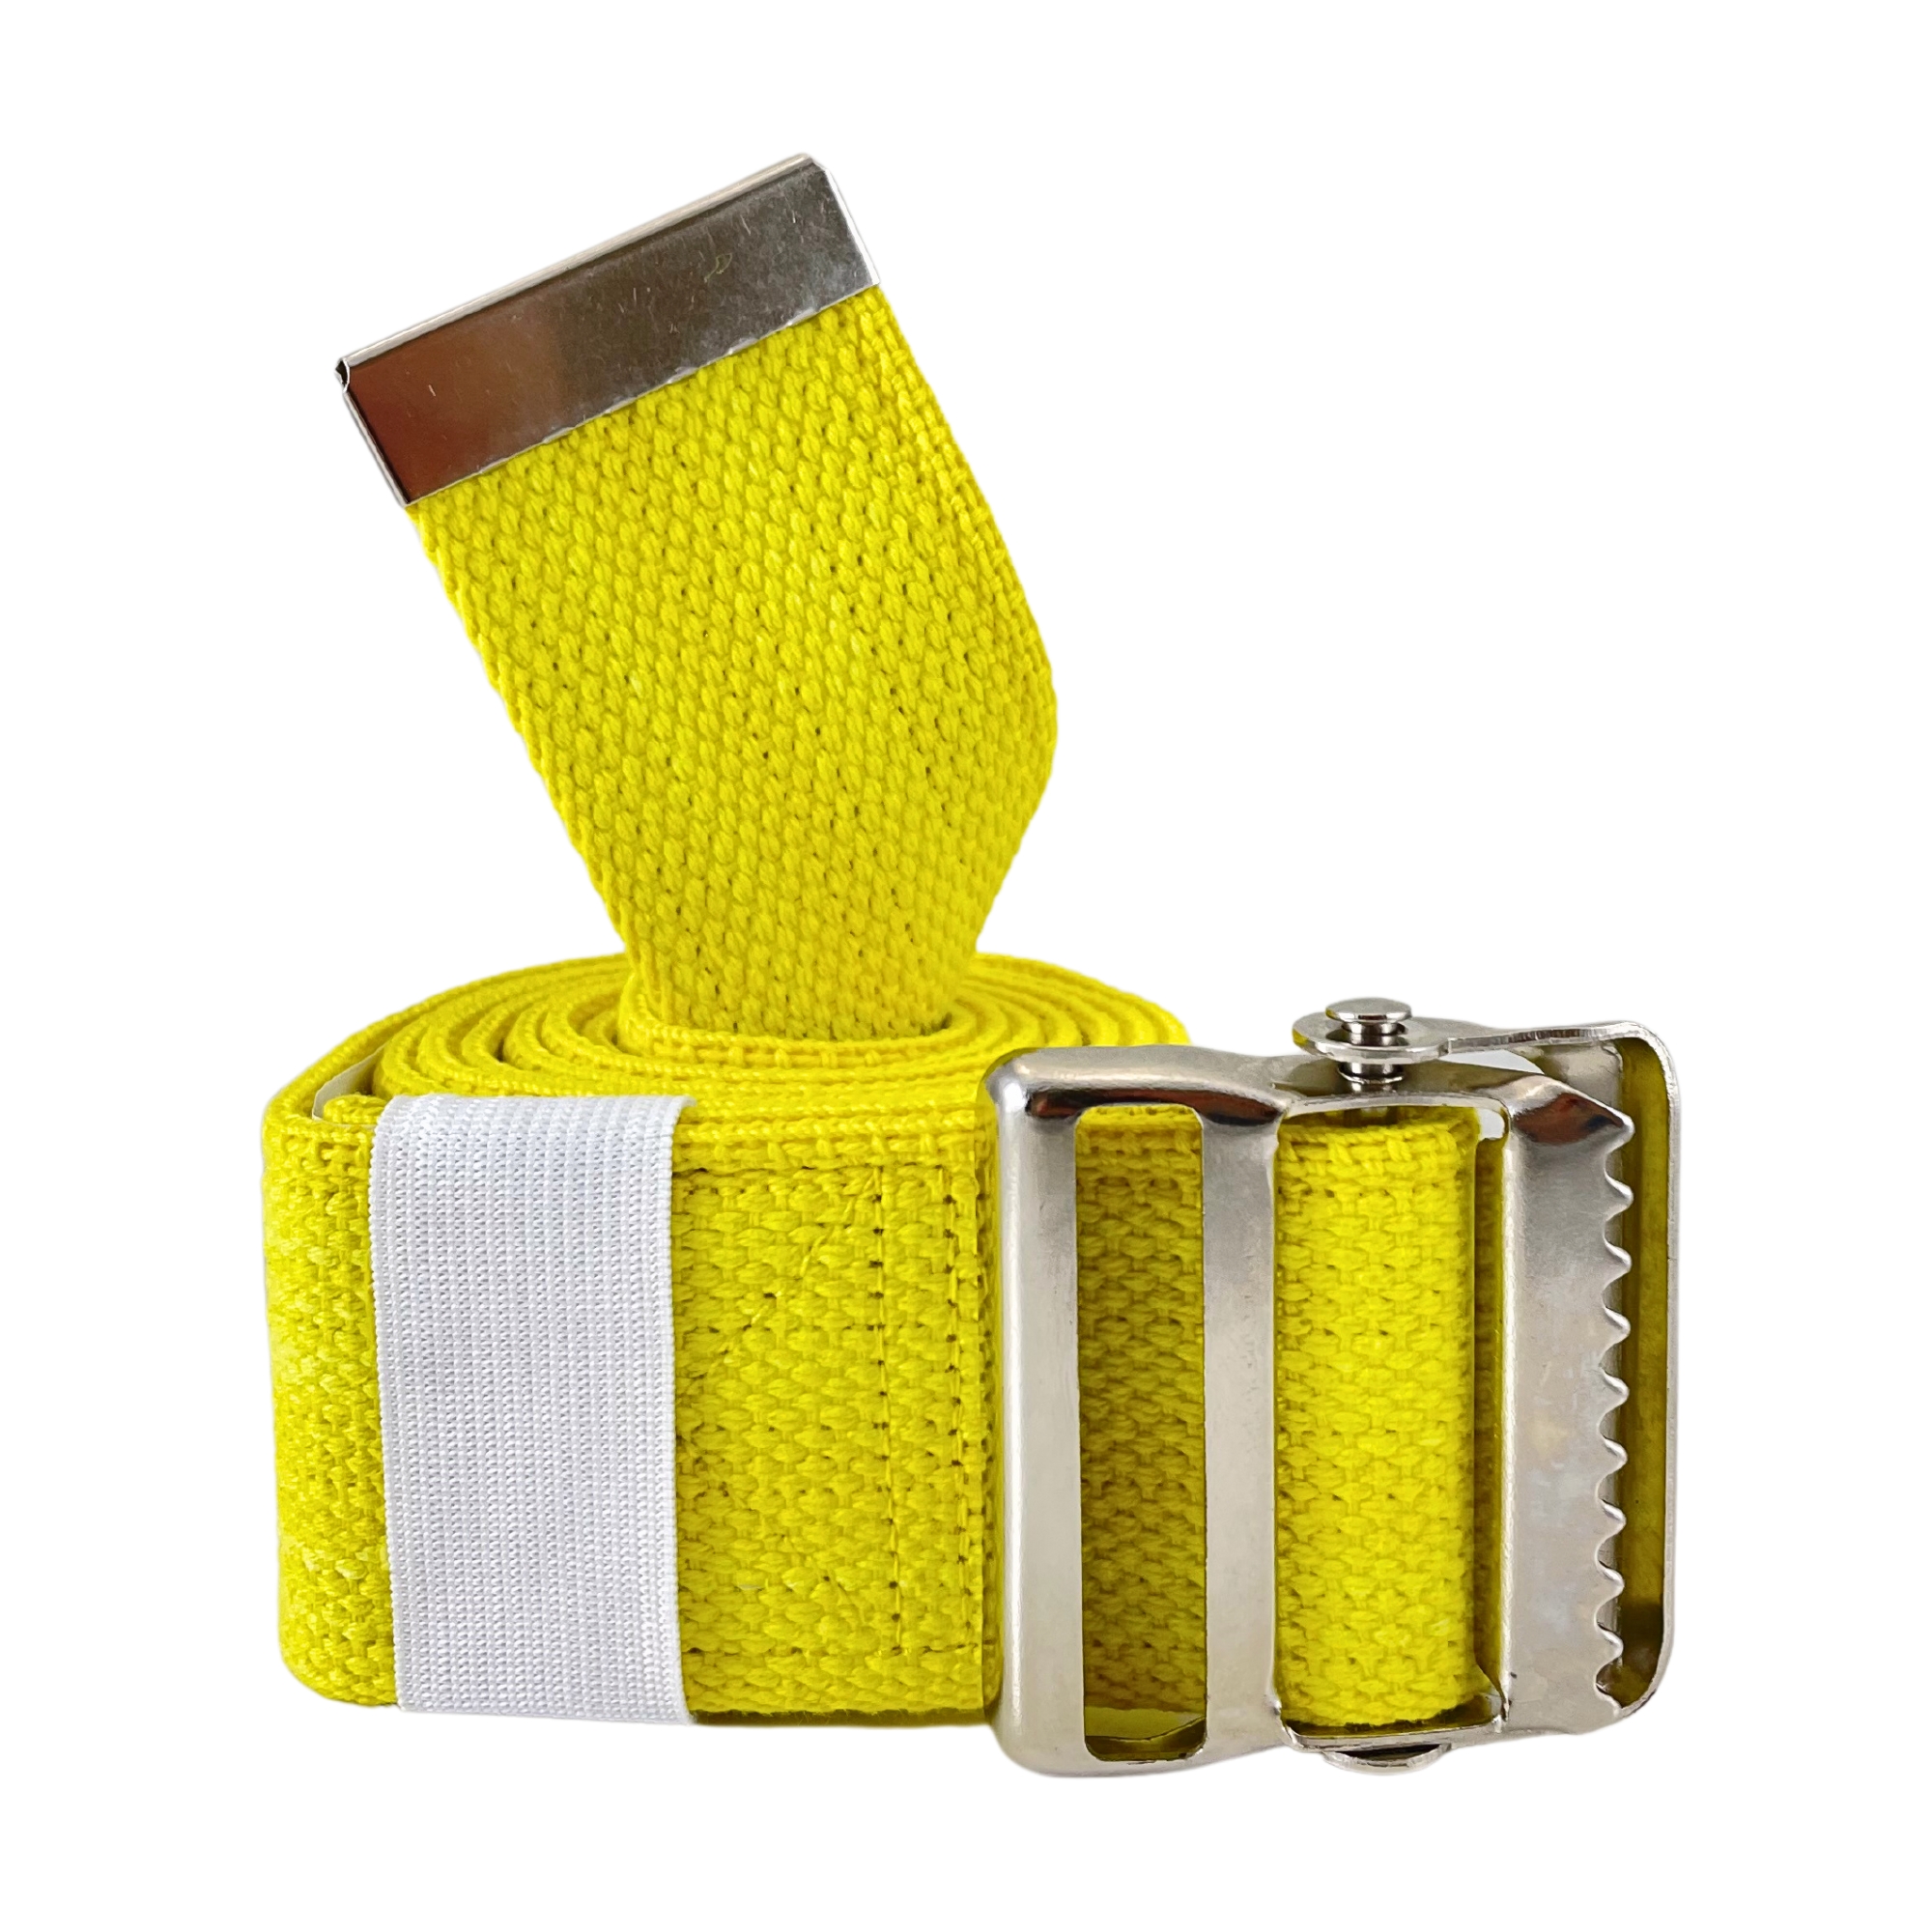 Gait Belt for Seniors with Metal Buckle